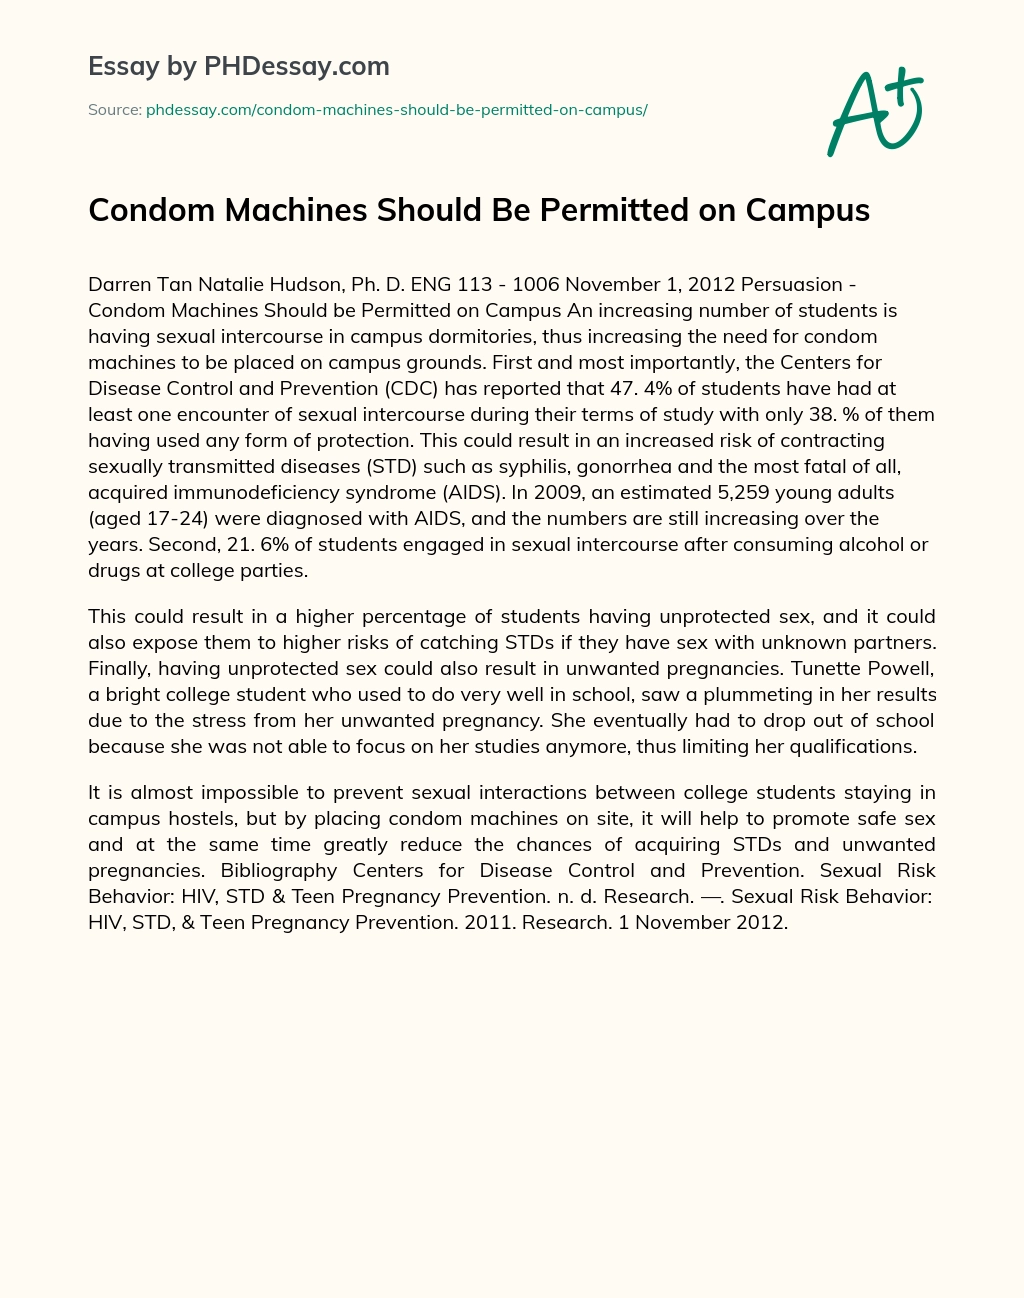 Condom Machines Should Be Permitted on Campus essay